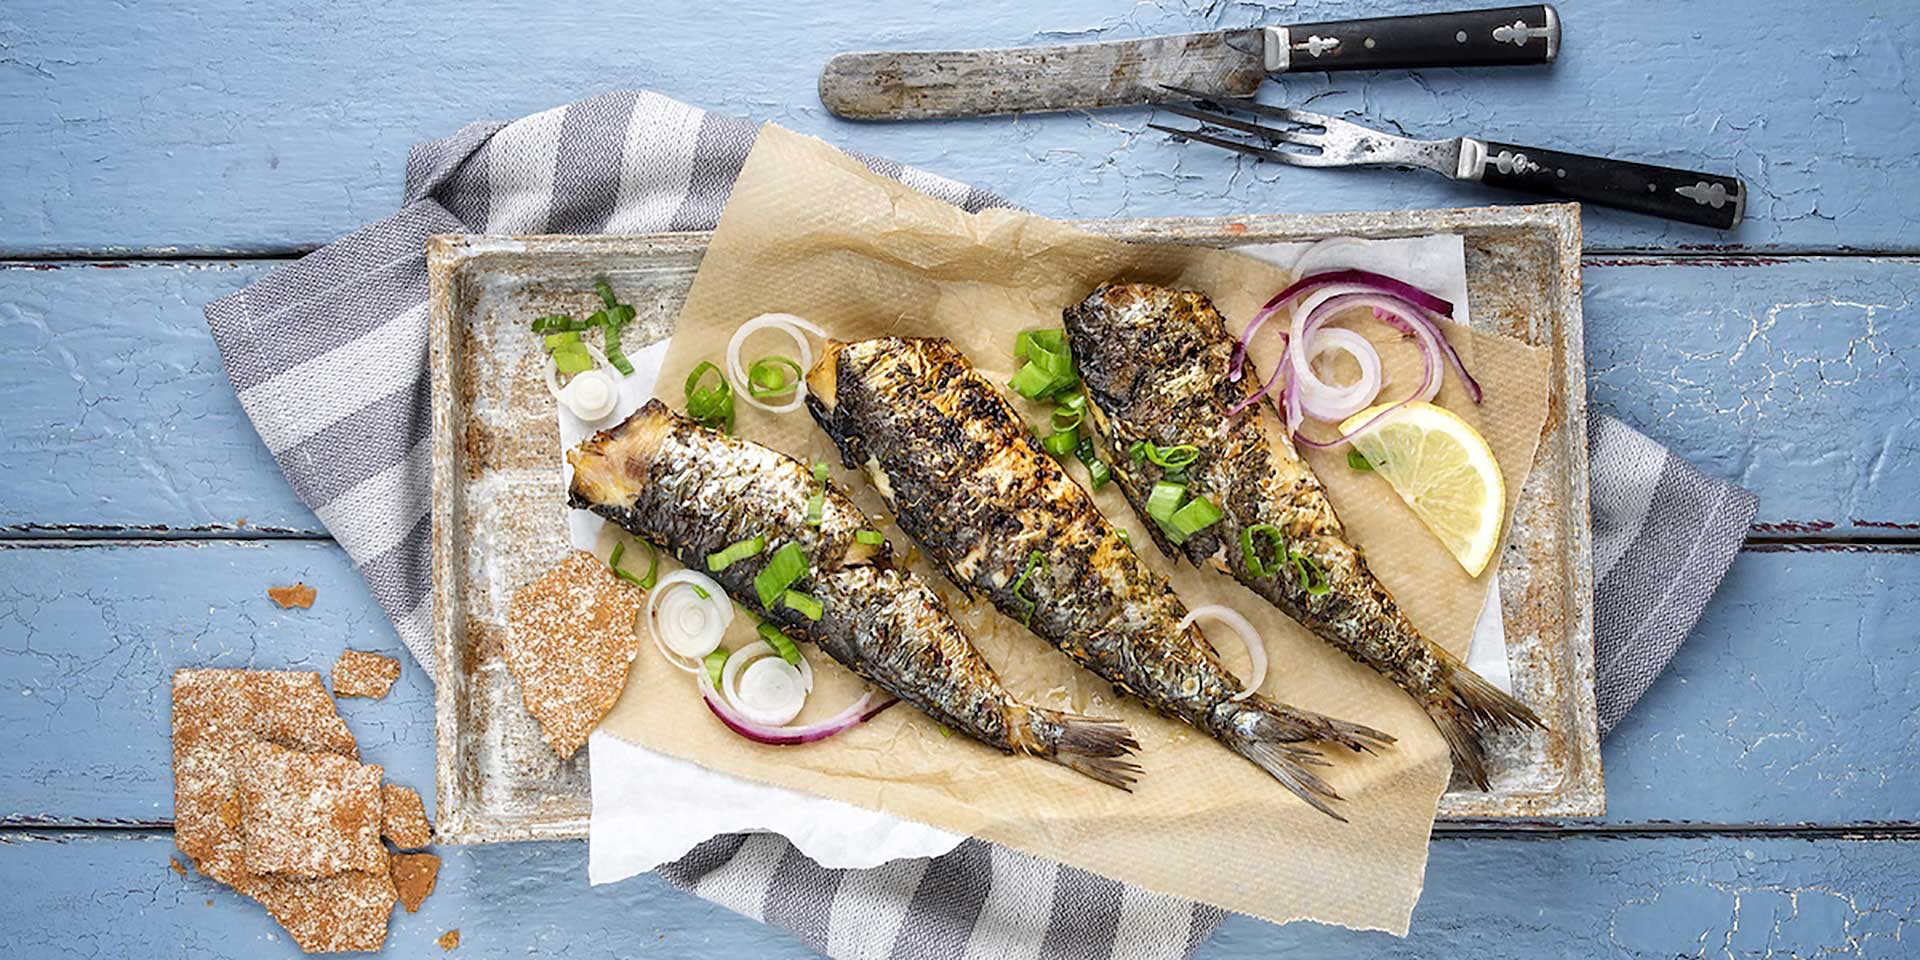 Barbecued Sardines with Lemon and Smoky Paprika